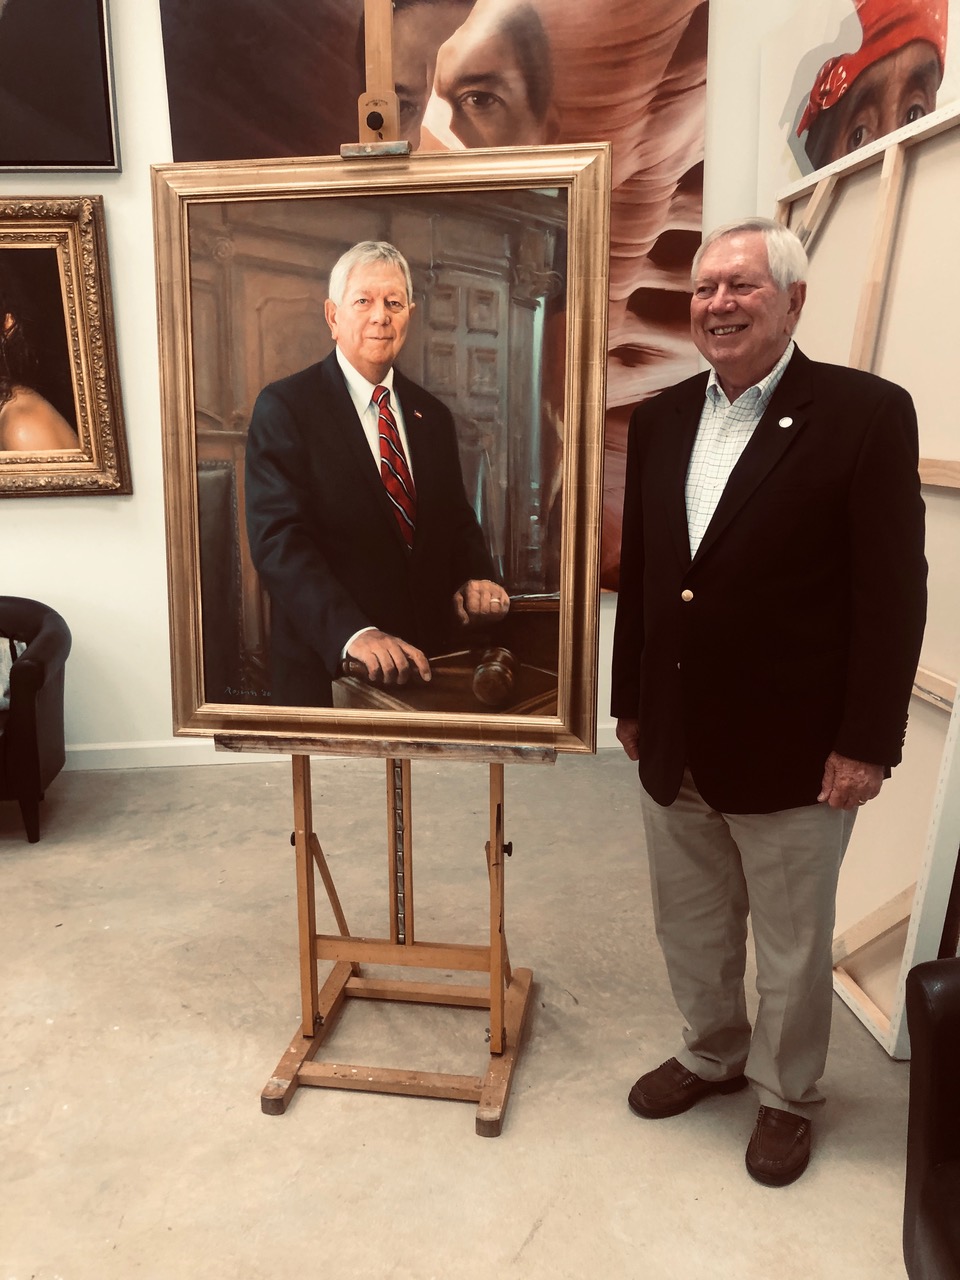 Ross Rossin Portrait Artist in Atlanta's Oil Painting of Terry Coleman - Portraiture, USA